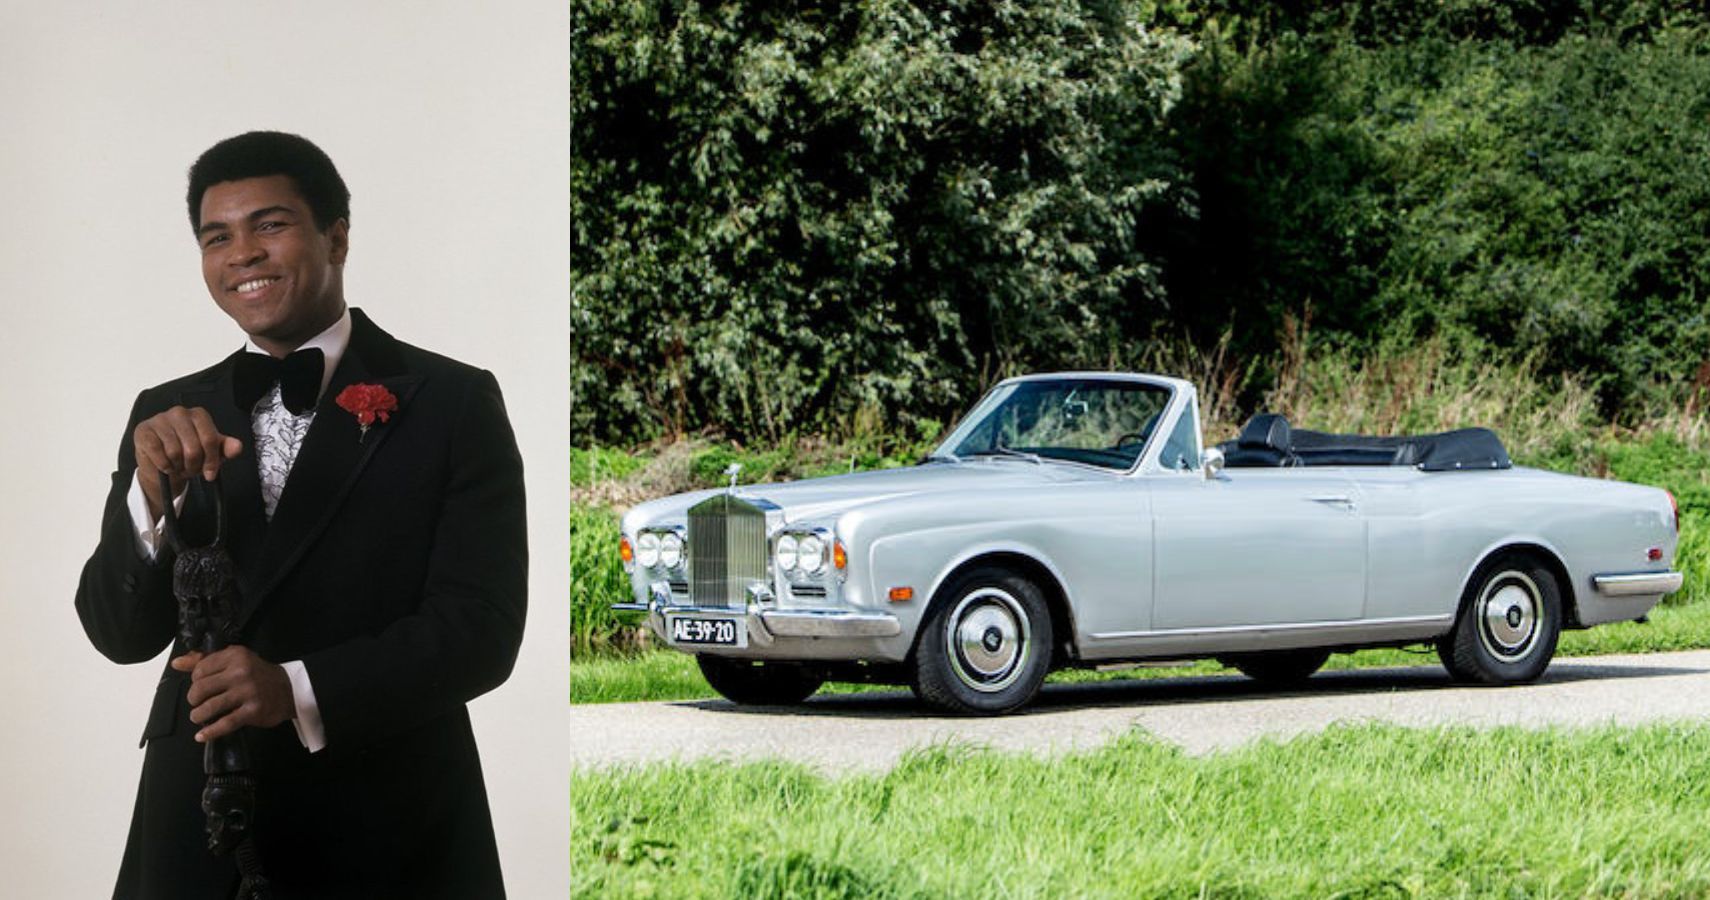 Muhammad Ali And 1970 Rolls-Royce Silver Shadow Convertible